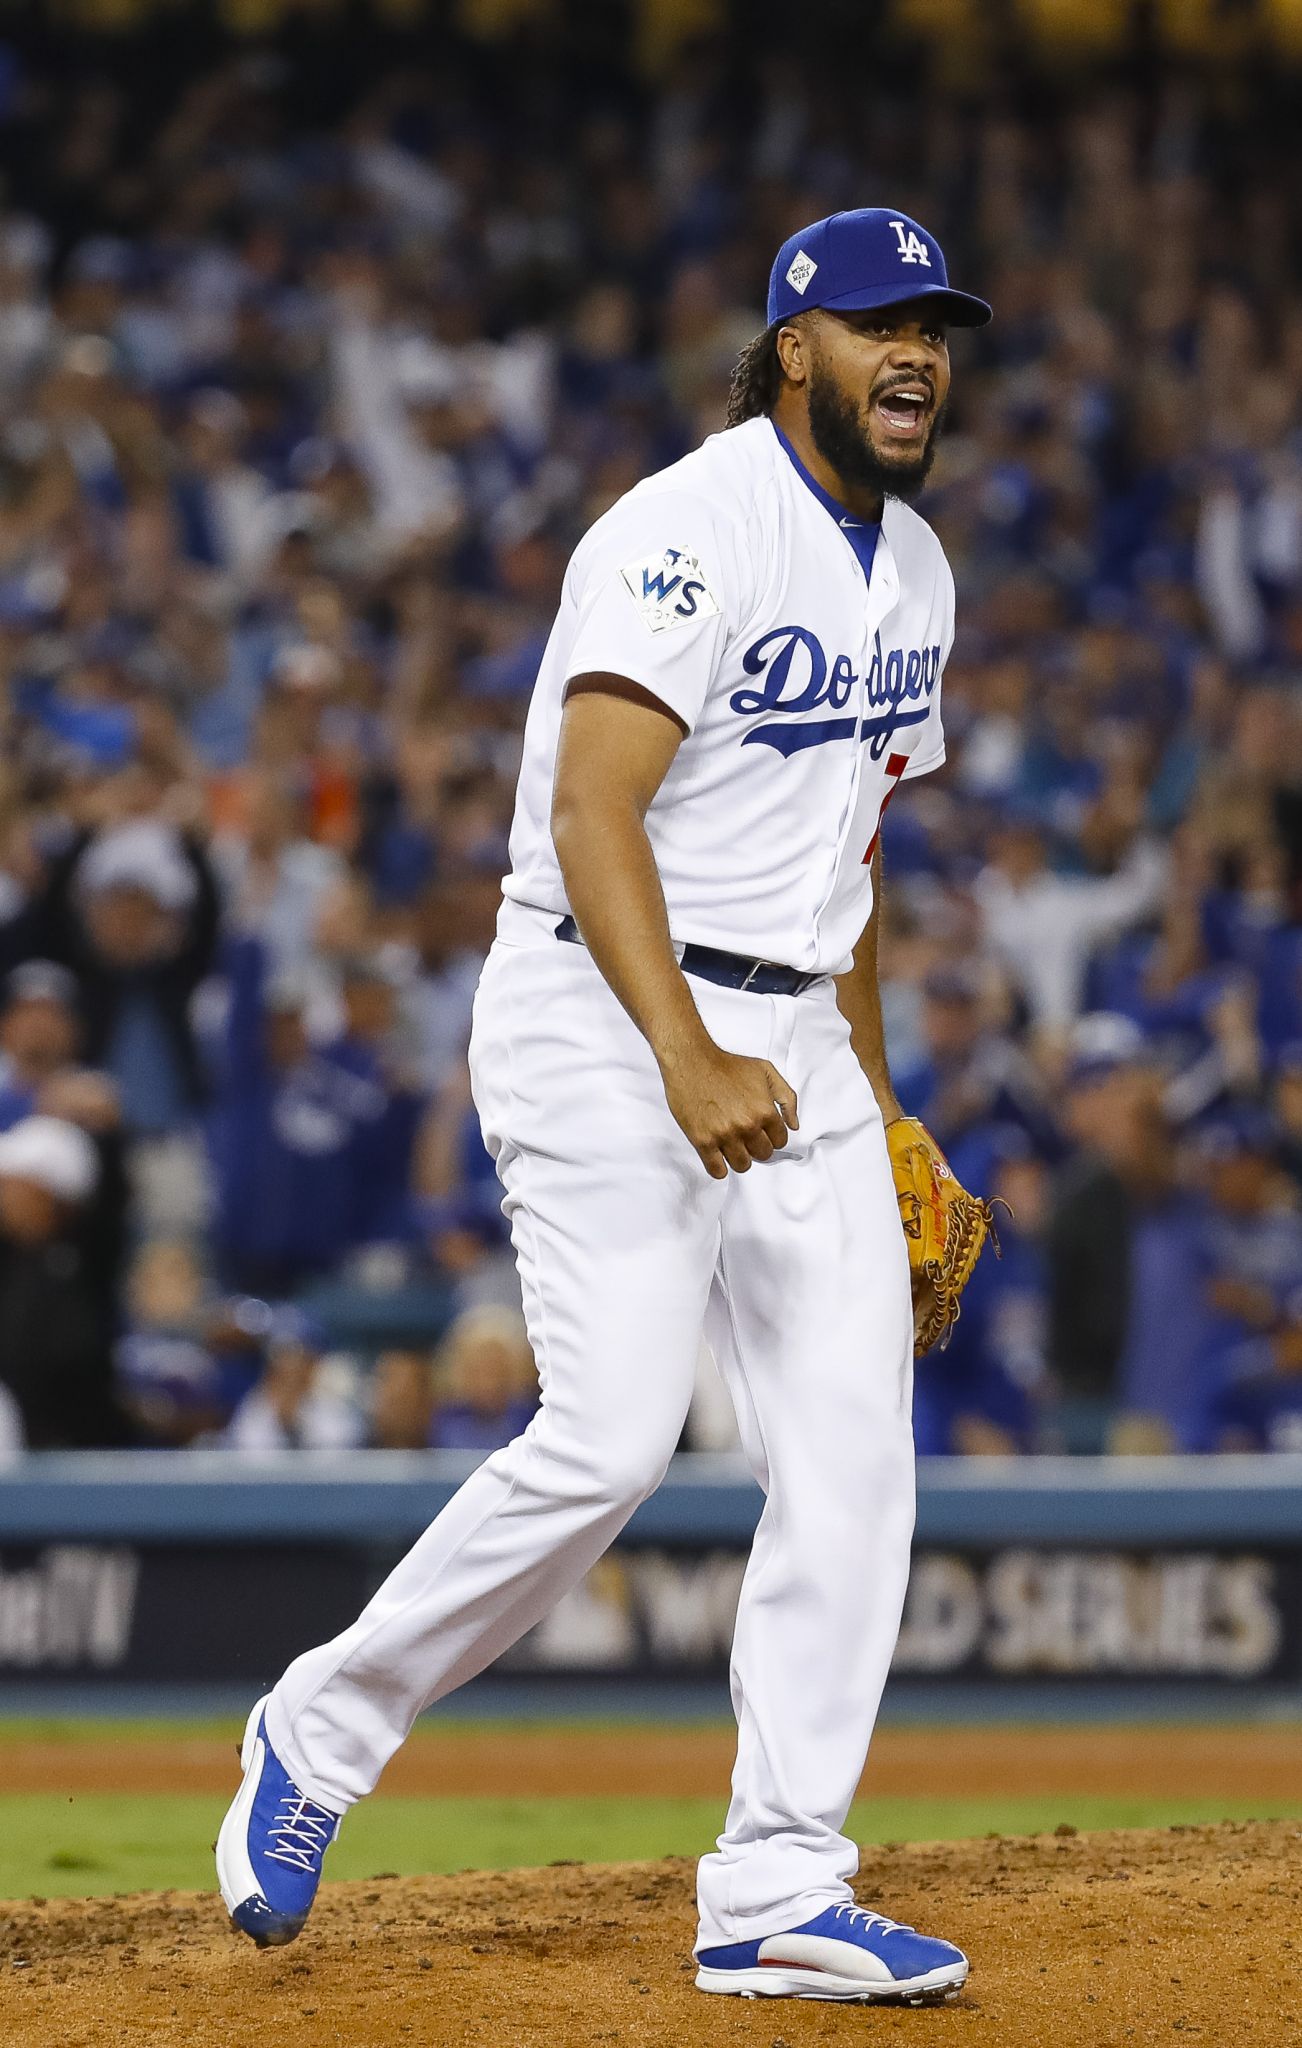 Dodgers World Series championship win attracts 12.6 million viewers